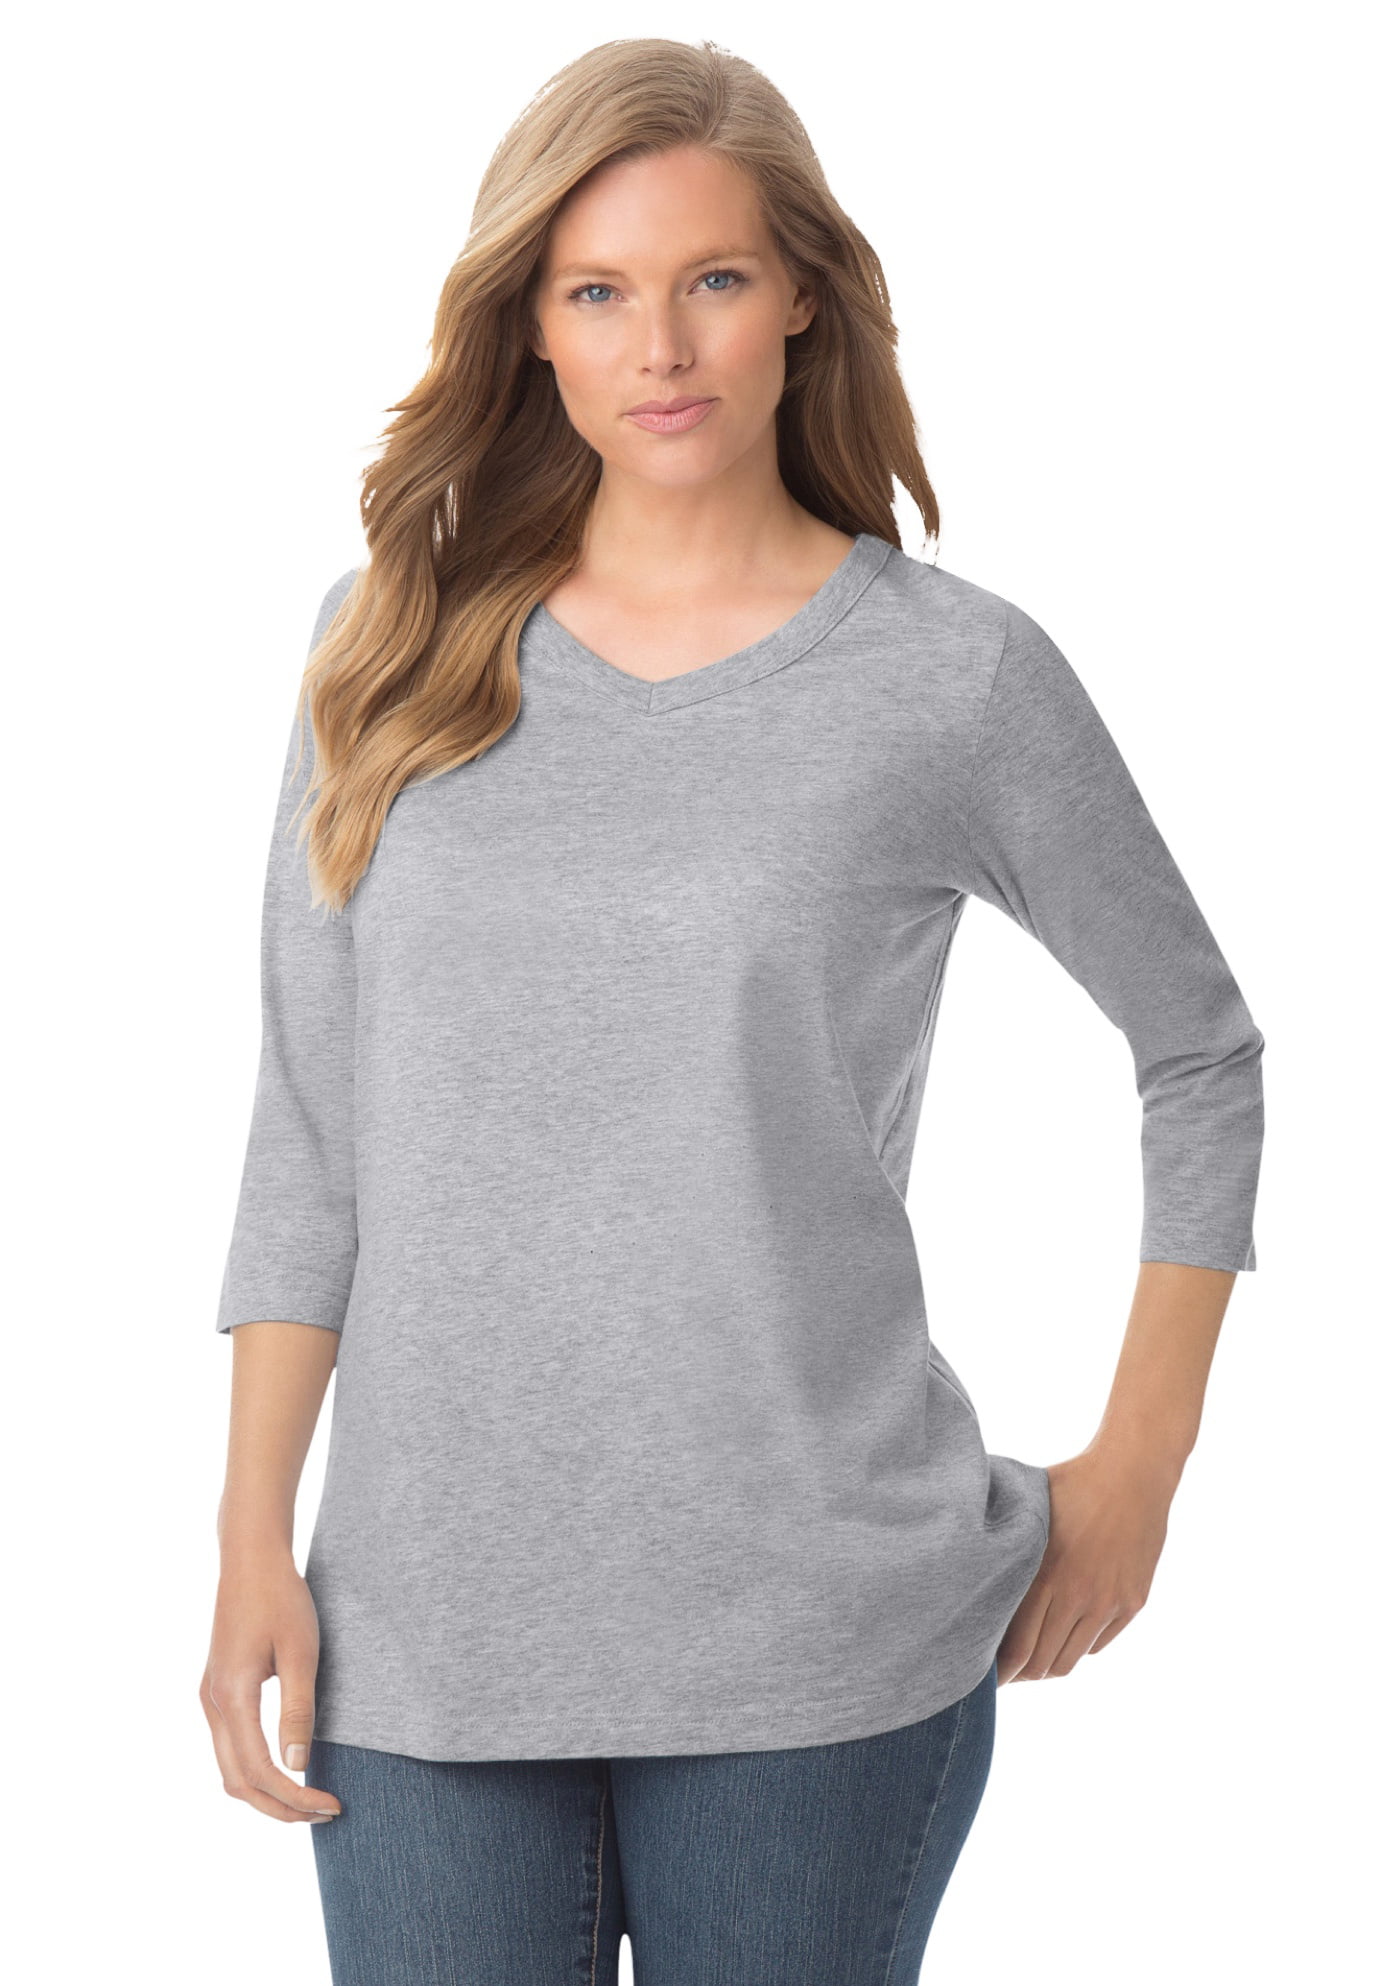 Woman Within Women's Plus Size Perfect Three-Quarter Sleeve V-Neck Tee Shirt